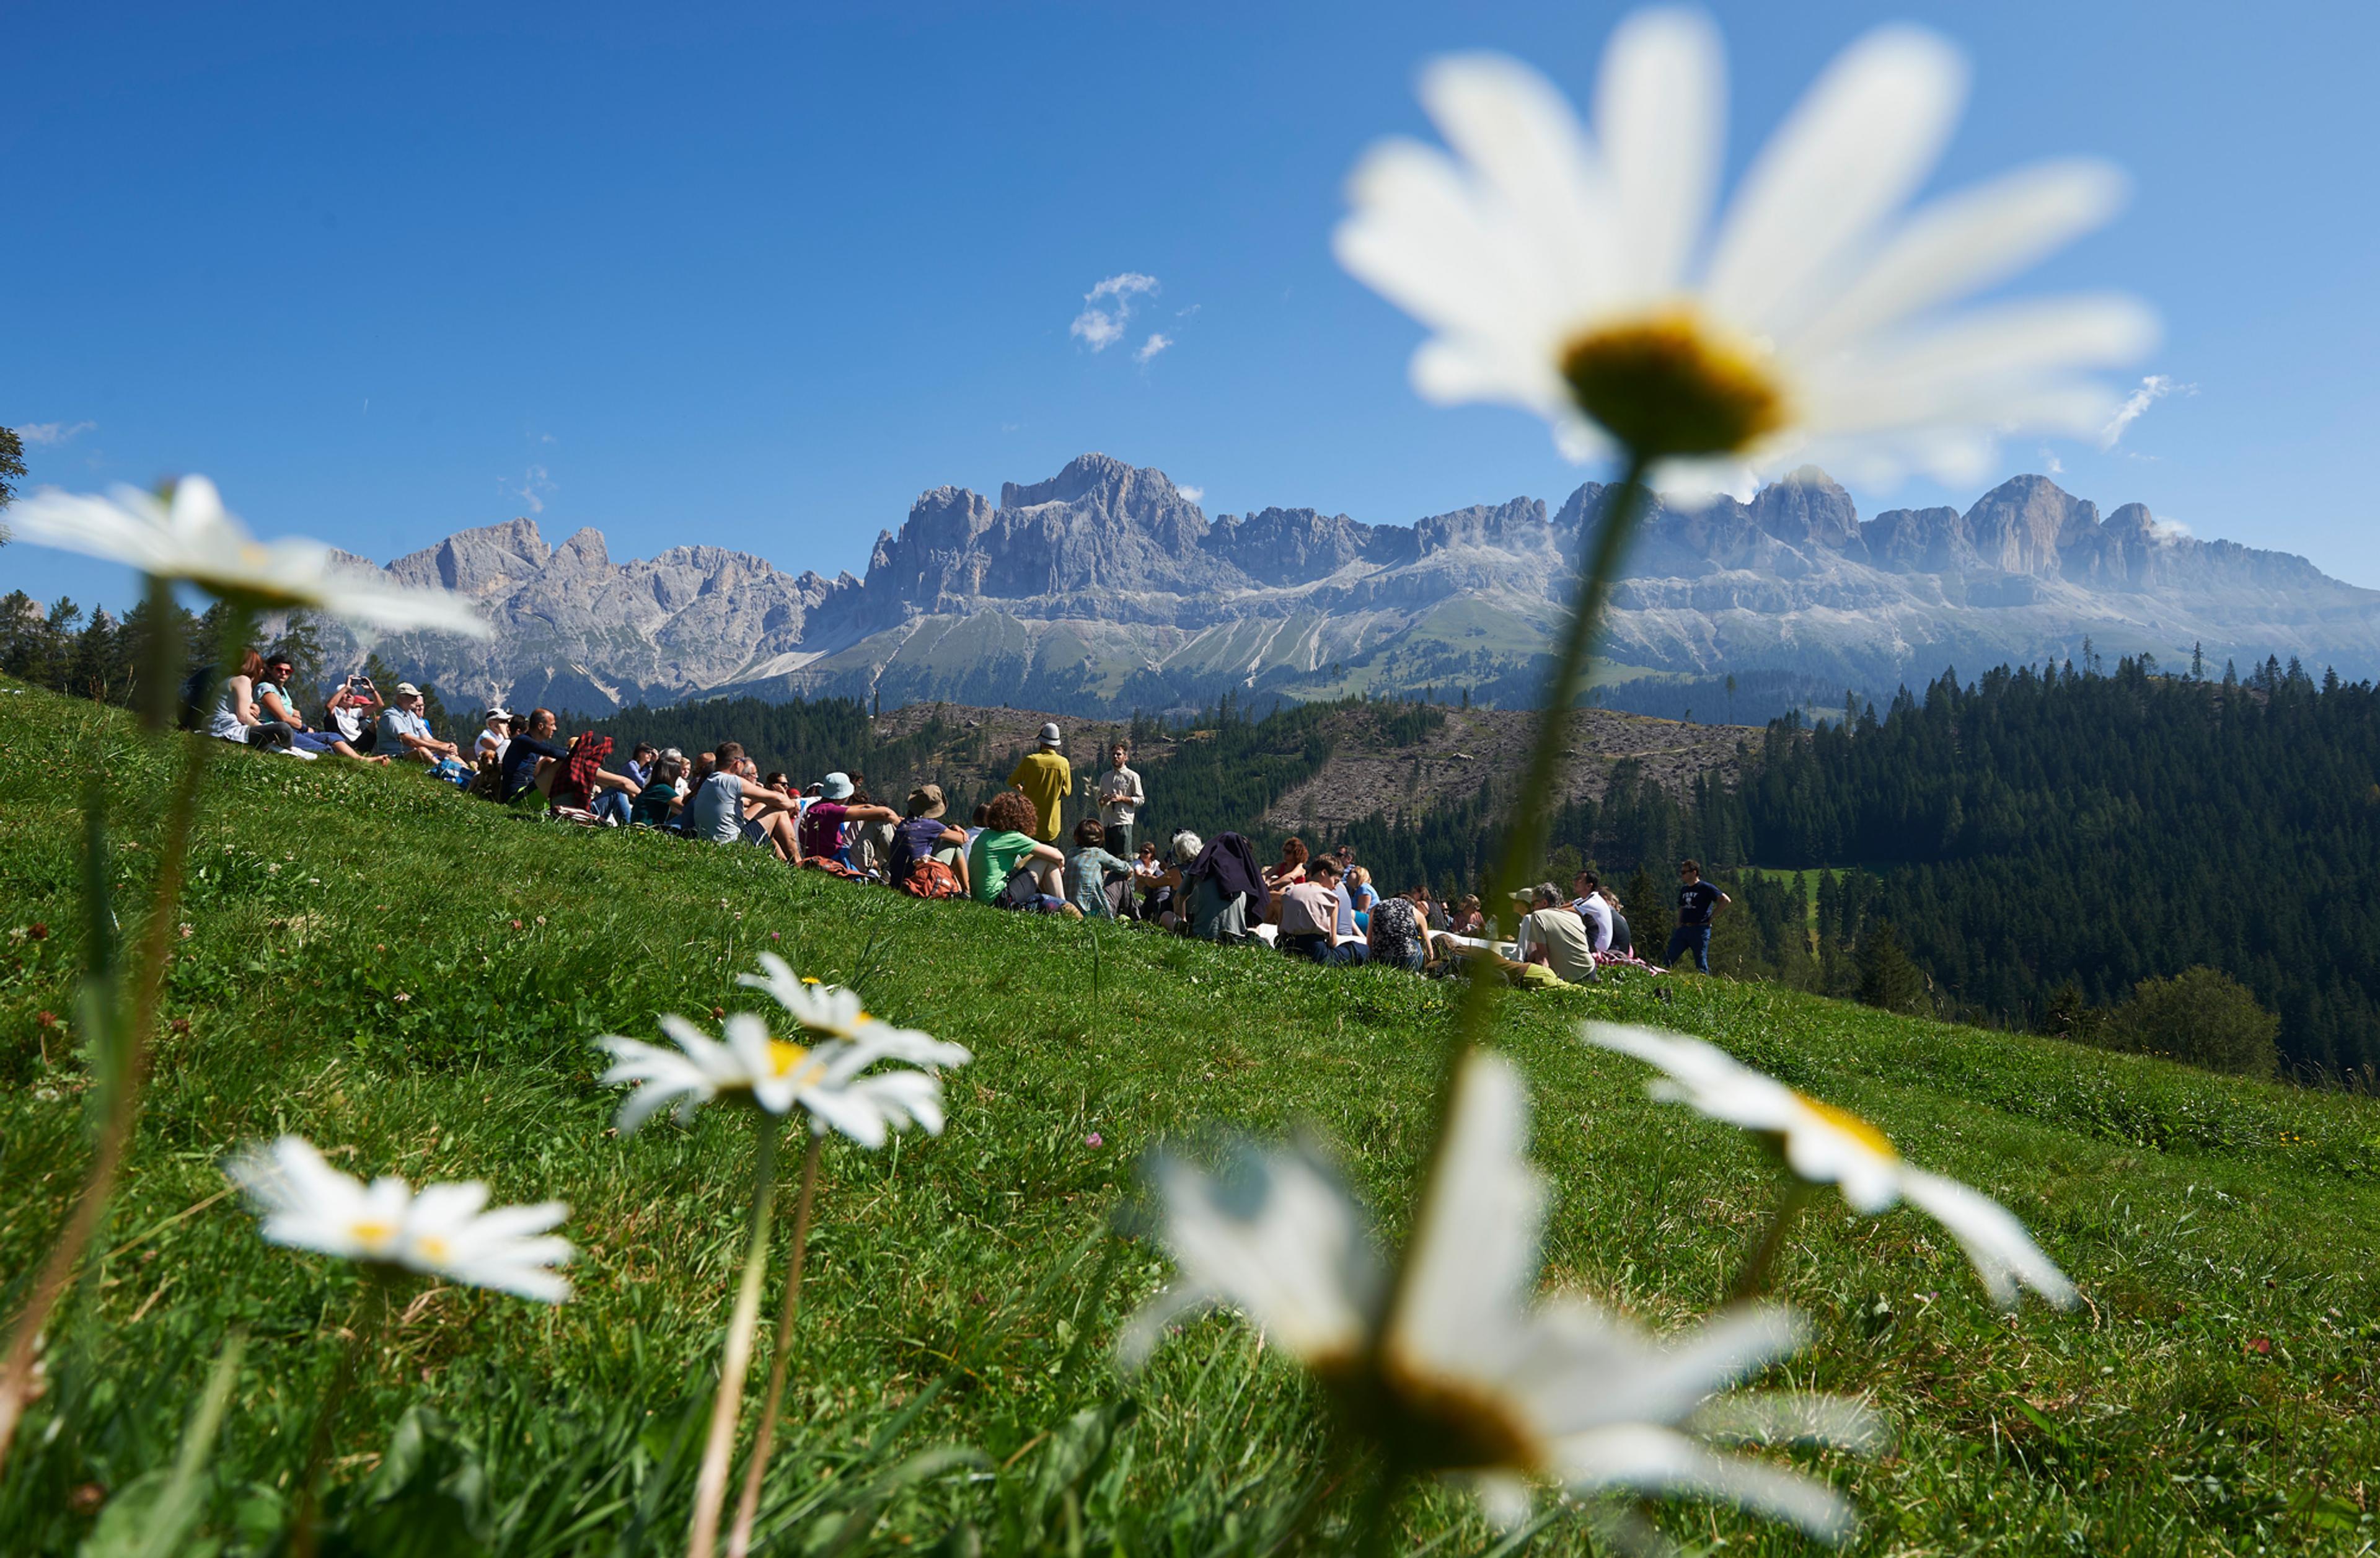 A group of people sat in a field talking with a mountain backdrop and flowers in the foreground